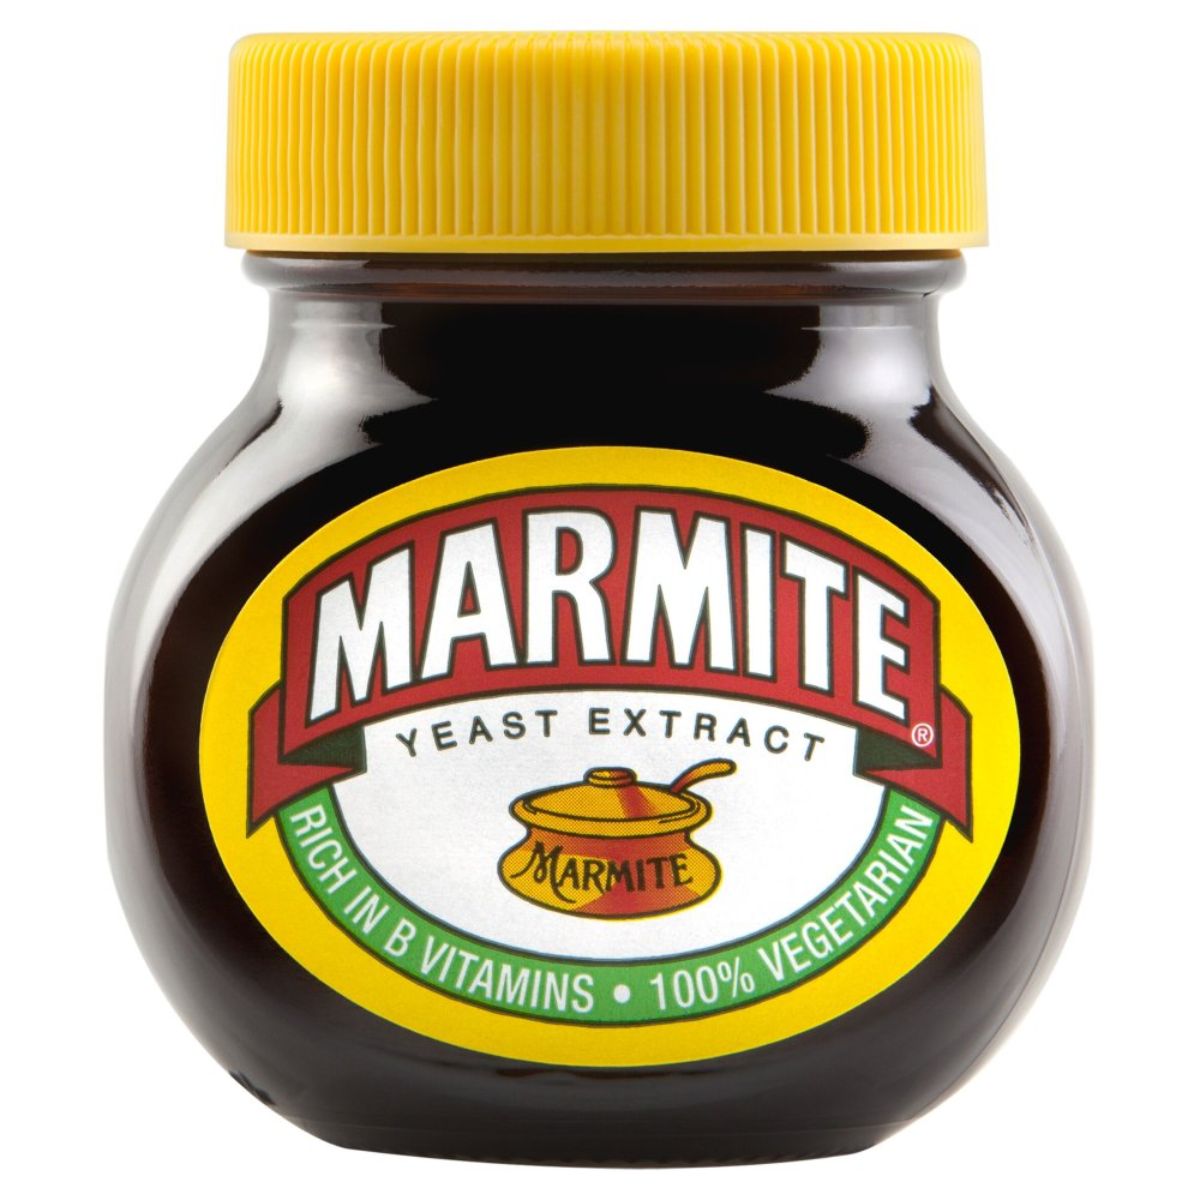 A jar of Marmite - Yeast Extract - 125g spread, emphasizing its richness in b vitamins and 100% vegetarian content.